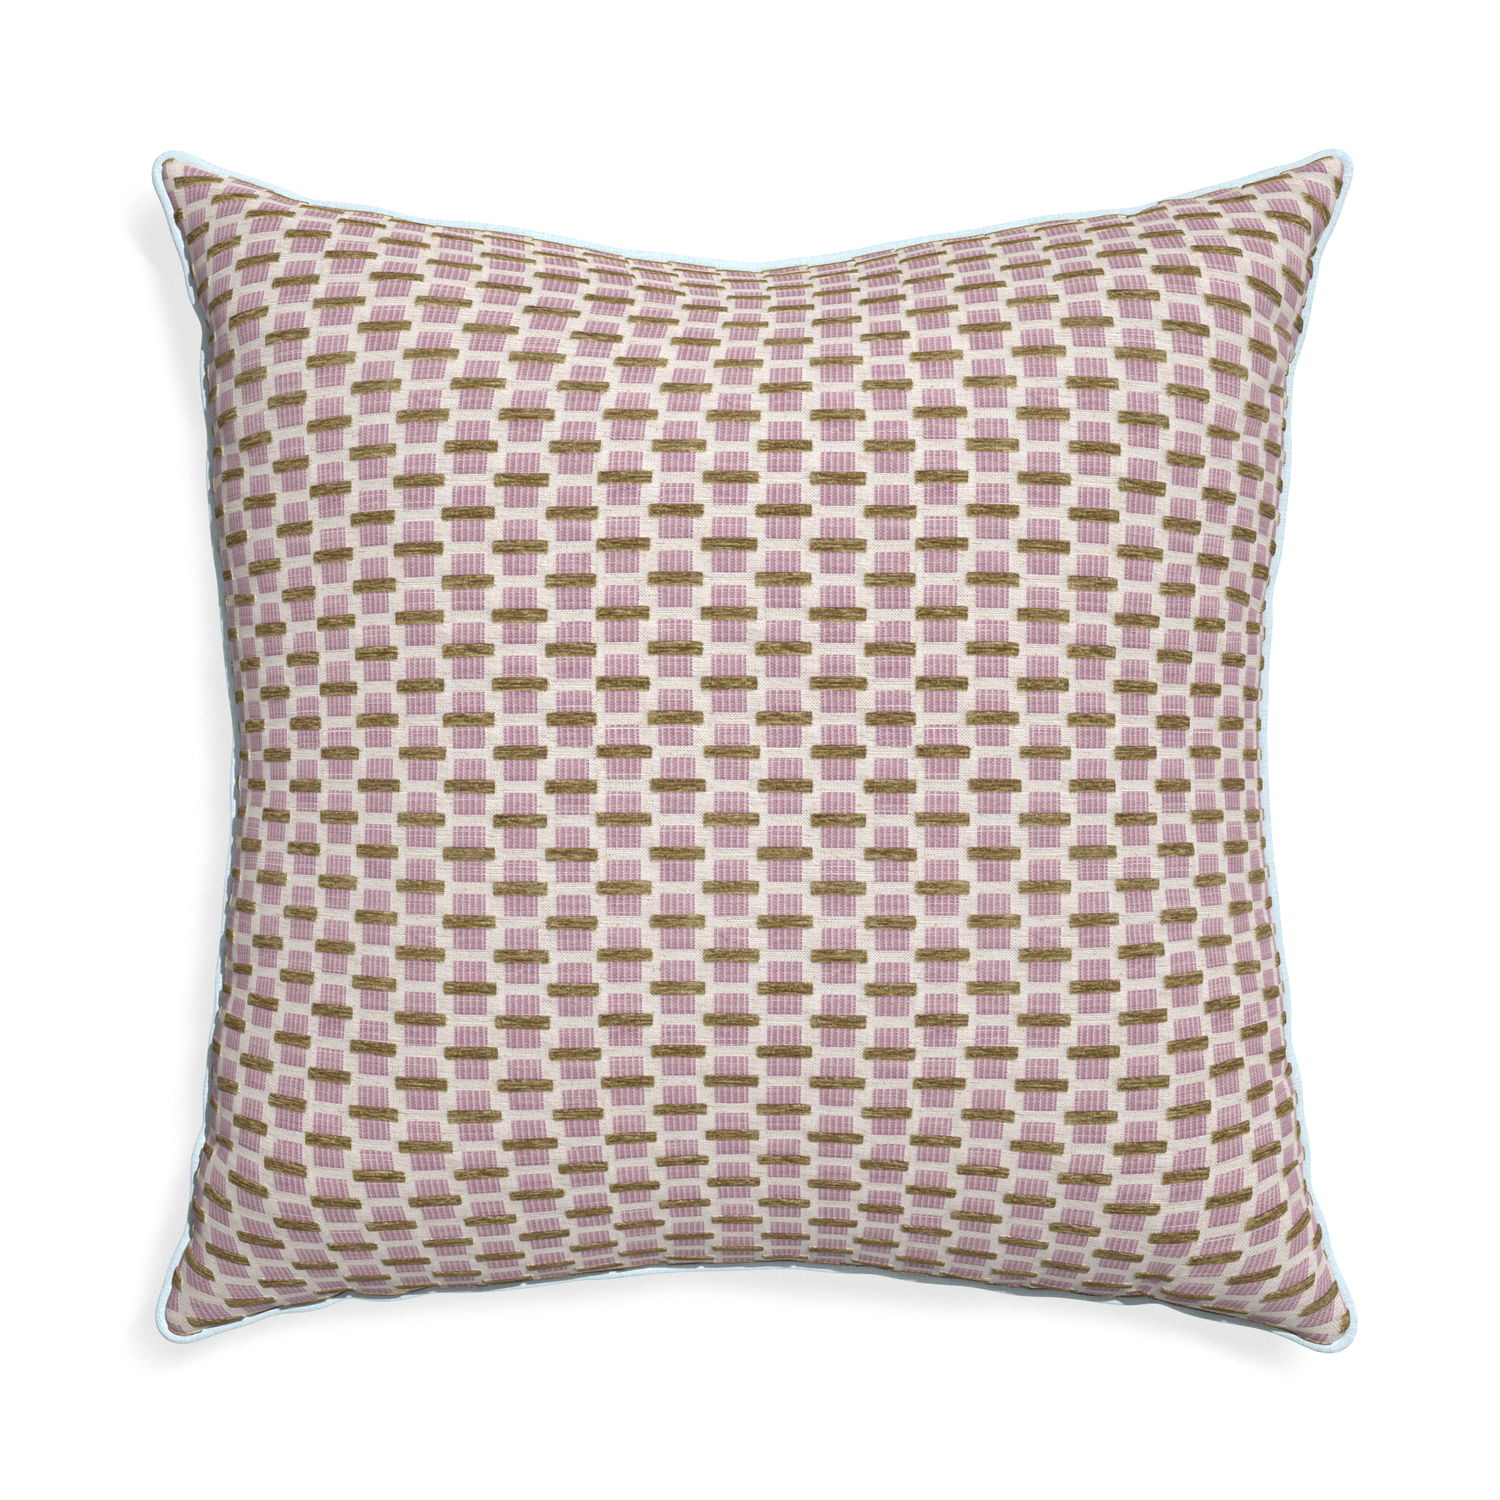 Euro-sham willow orchid custom pink geometric chenillepillow with powder piping on white background